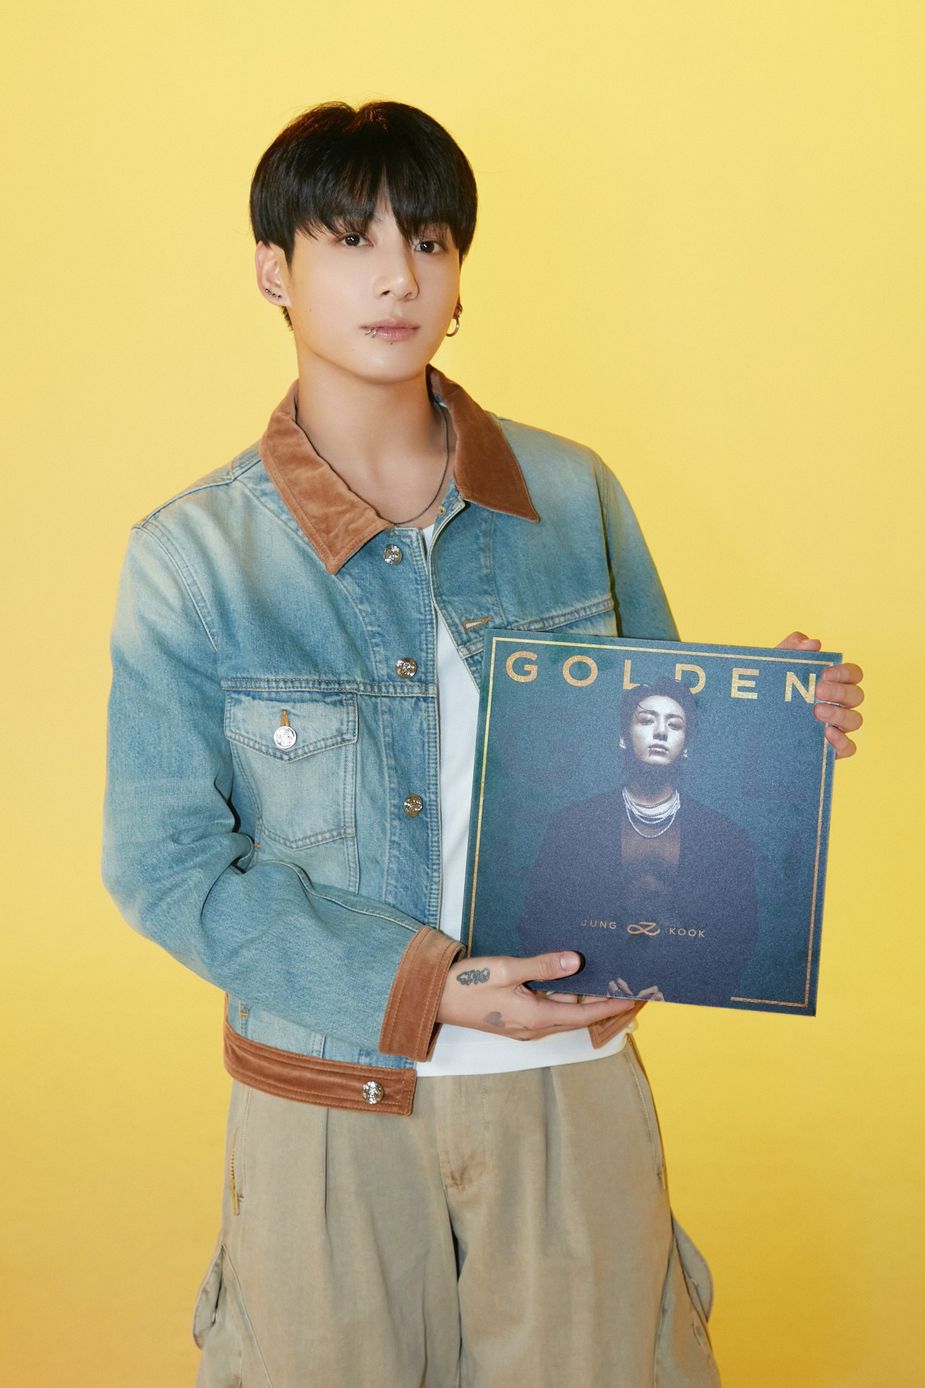 BTS Jungkook drops album 'Golden' and 'Standing Next to You' MV